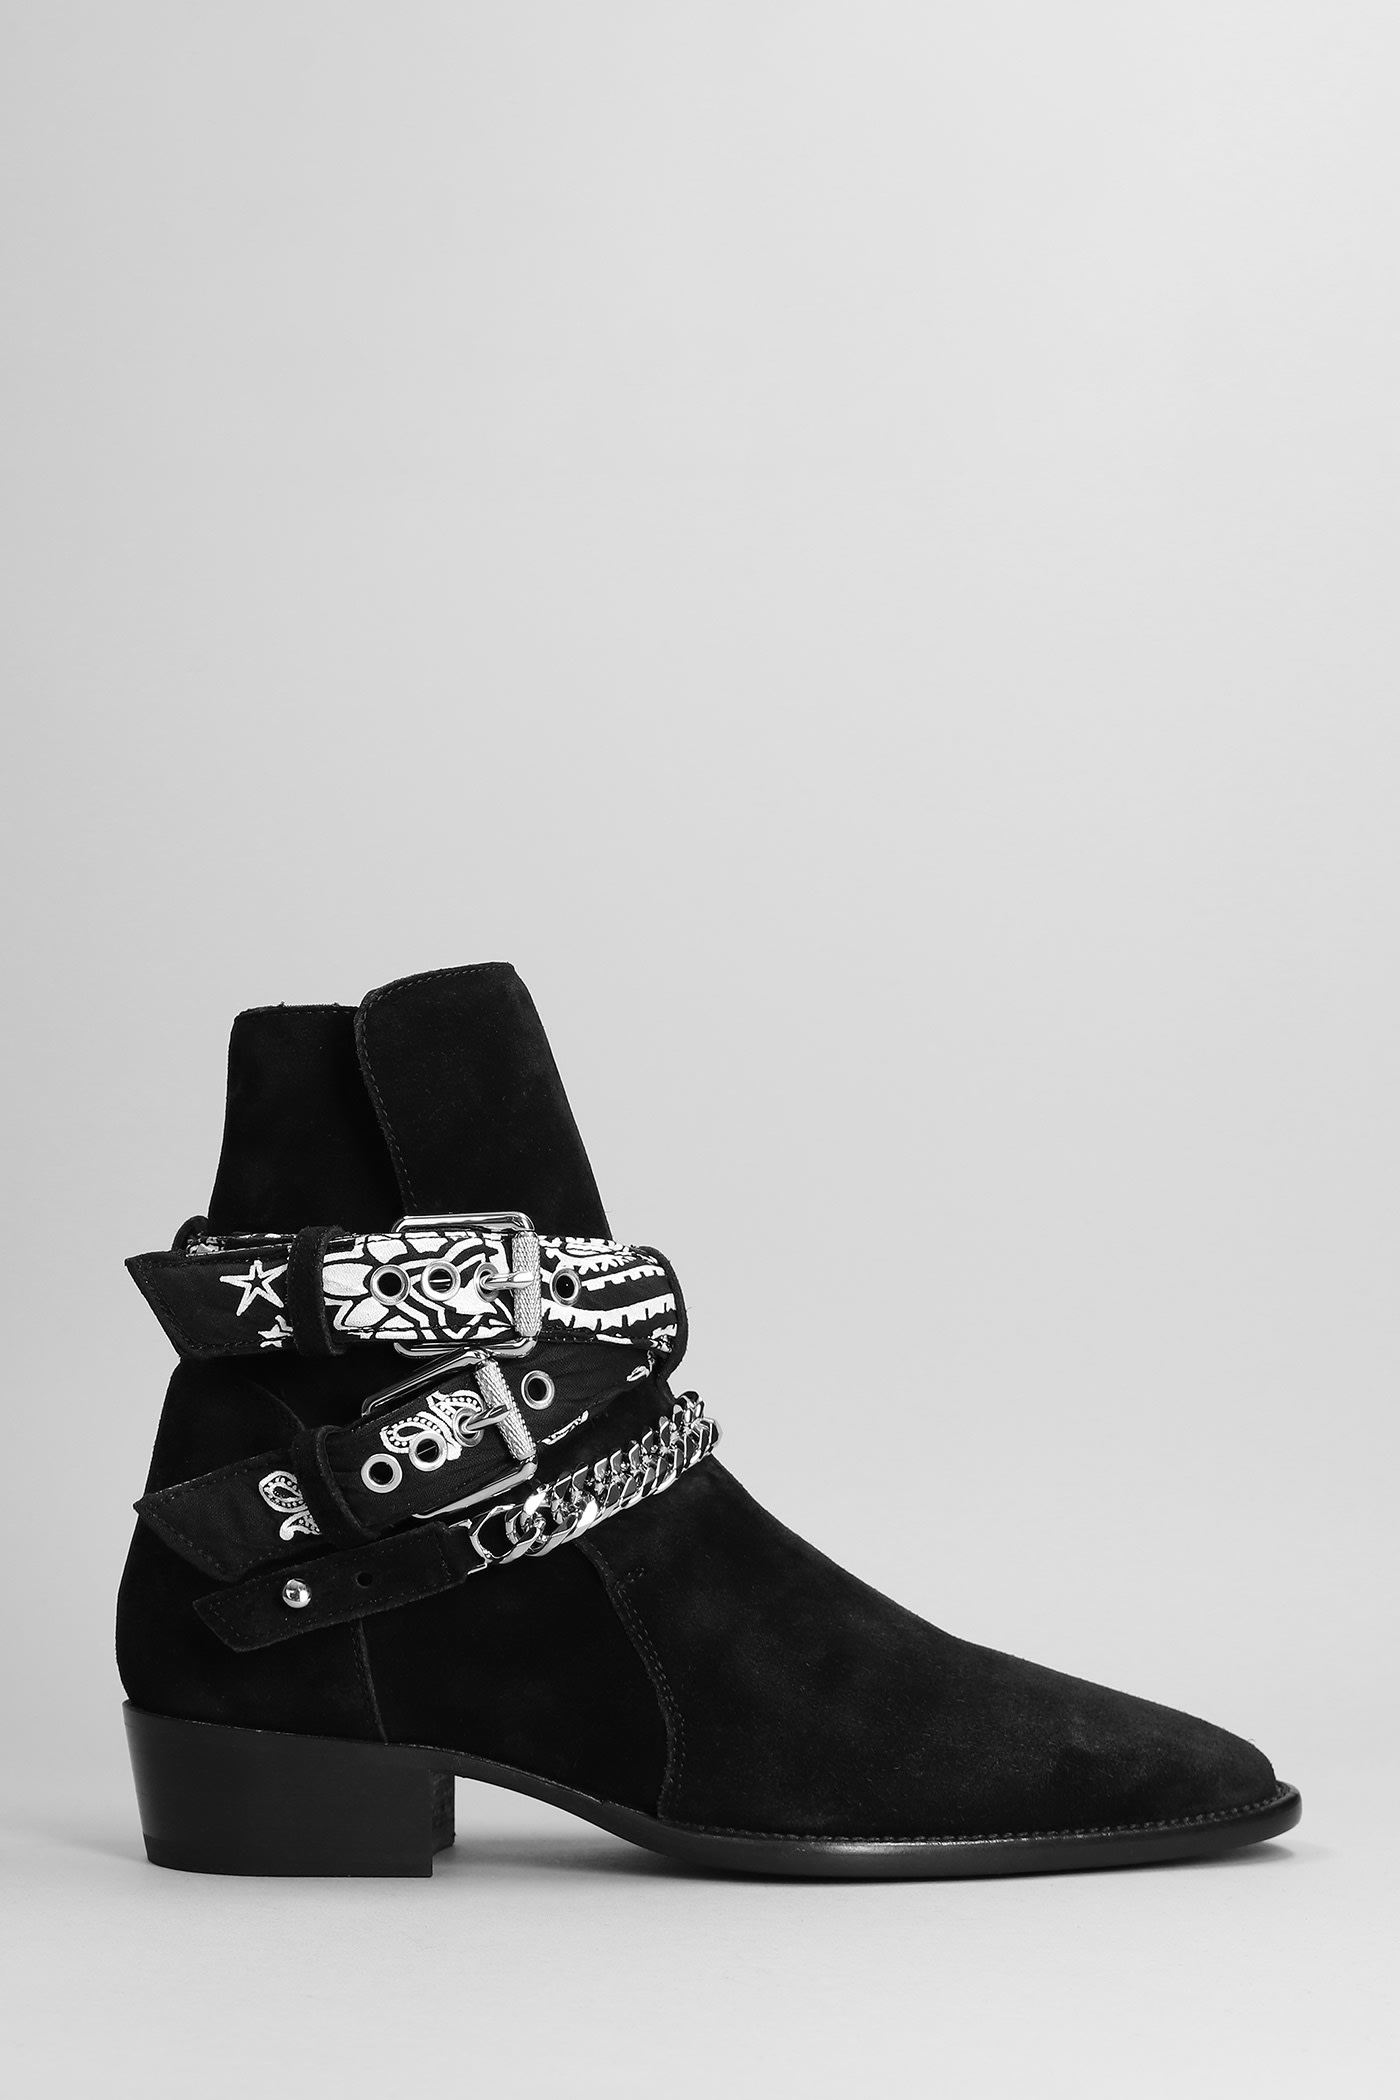 AMIRI Bandana Boot Ankle Boots In Black Suede